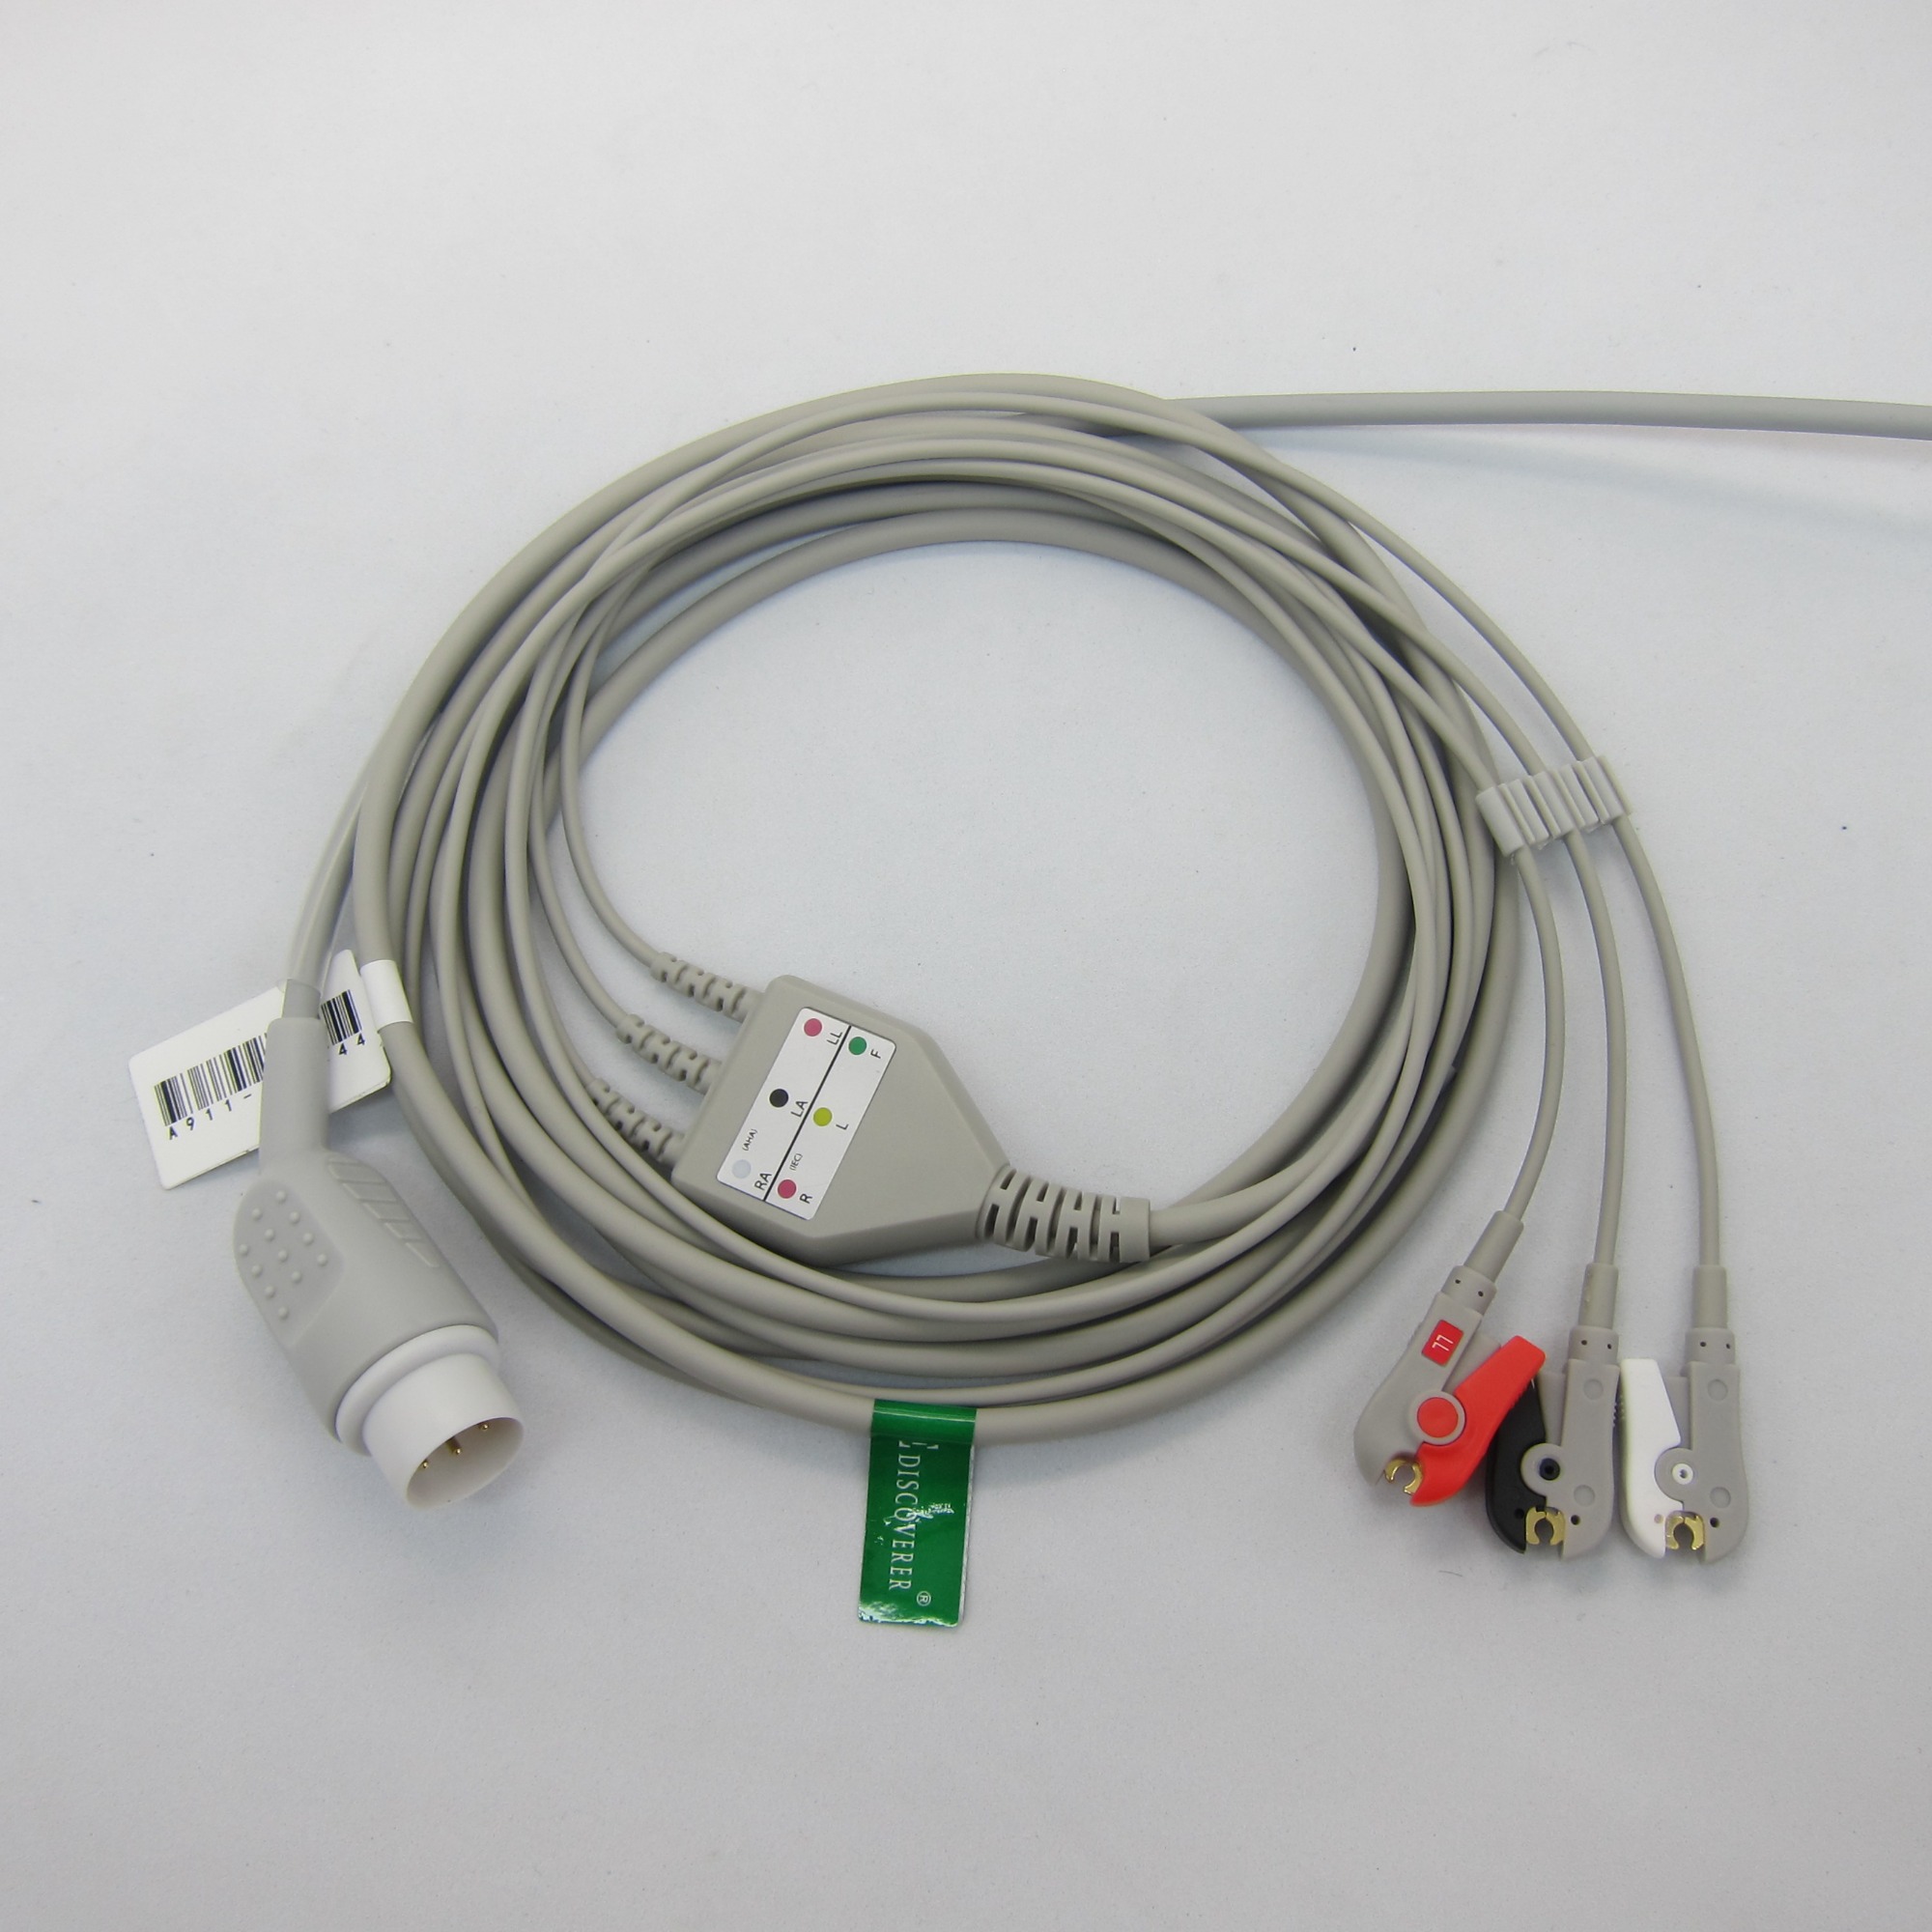 PHILIP-S DEFIBRILATOR One-piece 3 or 5 Leads Snap Or Clip ECG cable and leadwires for ECG machine